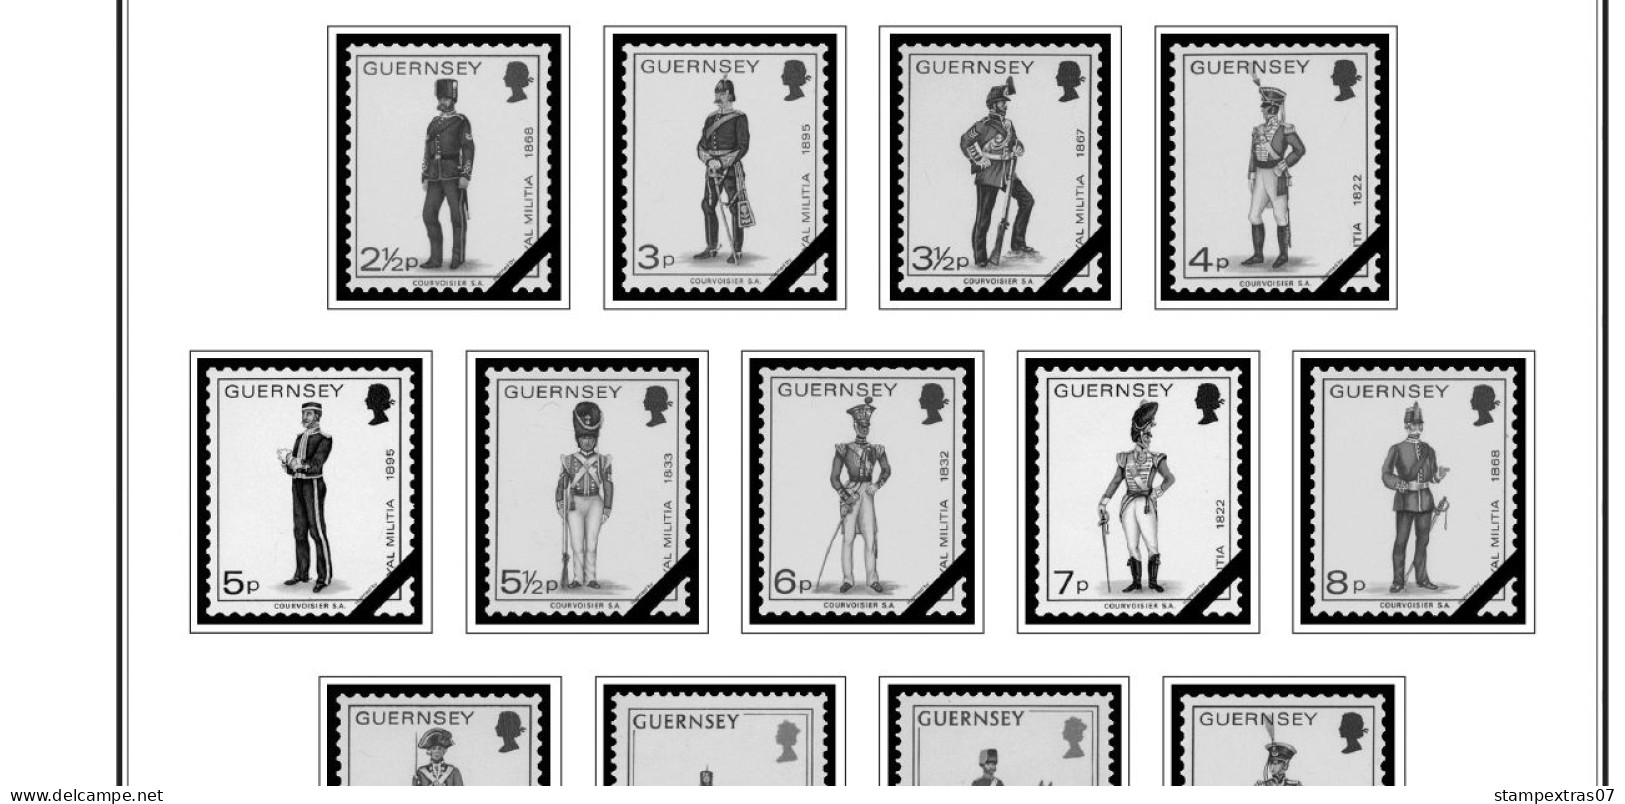 GB GUERNSEY 1958-2010 + 2011- 2020 STAMP ALBUM PAGES (212 B&w Illustrated Pages) - Anglais